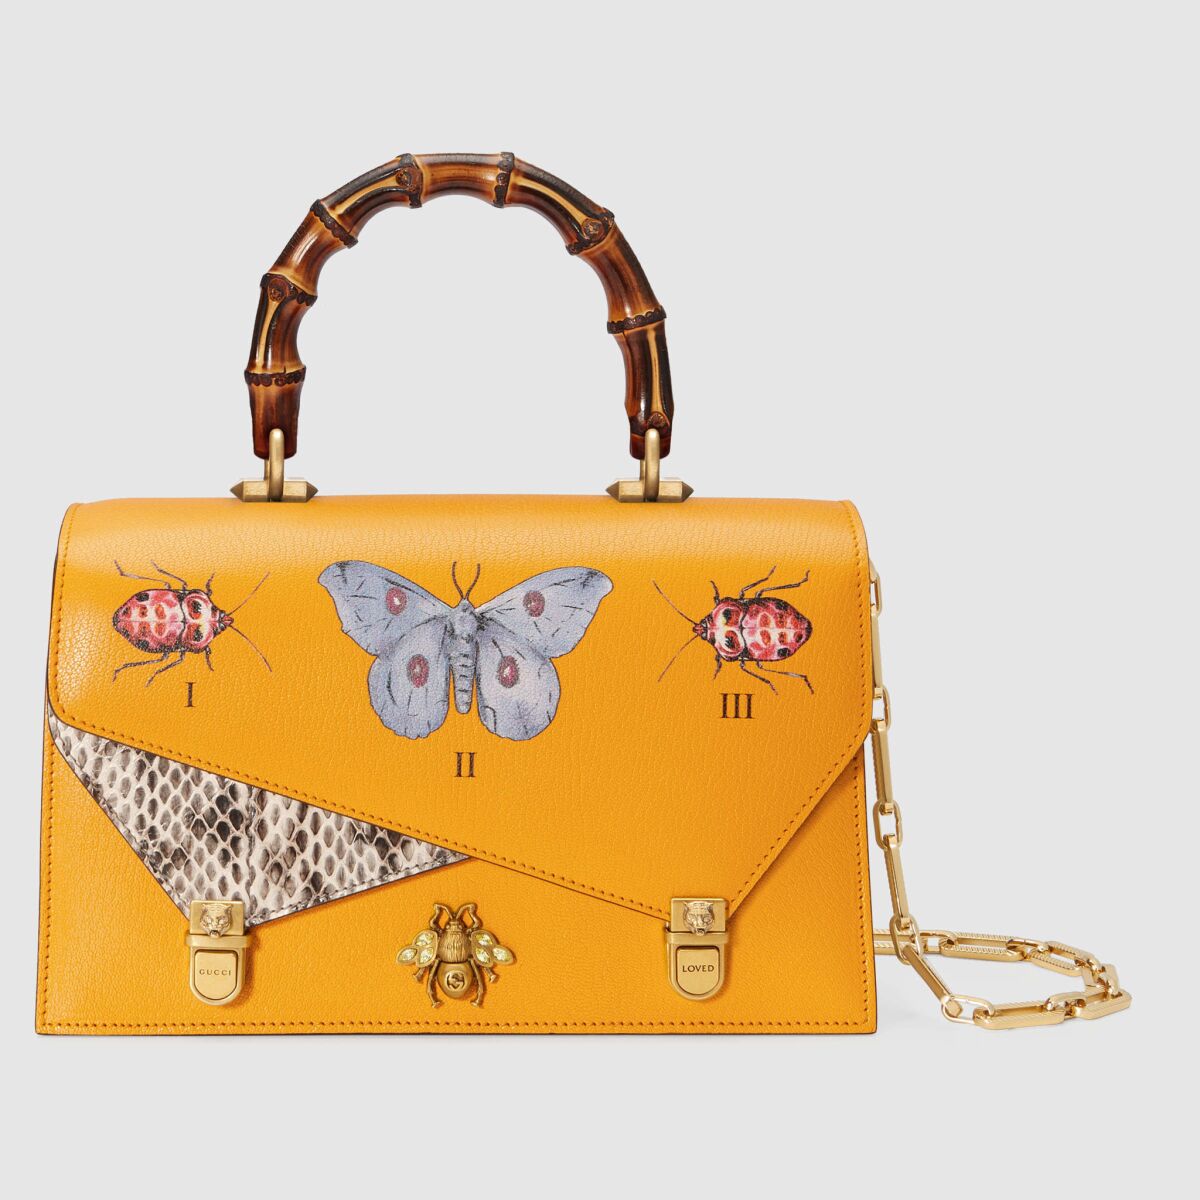 The 'Ottilia' bag from Gucci is one of several this season from the Italian house that reprises its signature bamboo handle. Motifs from nature -- butterflies, moths and beetles -- run through the fall/winter offerings. This leather small top handle bag is $3,500. (Gucci)